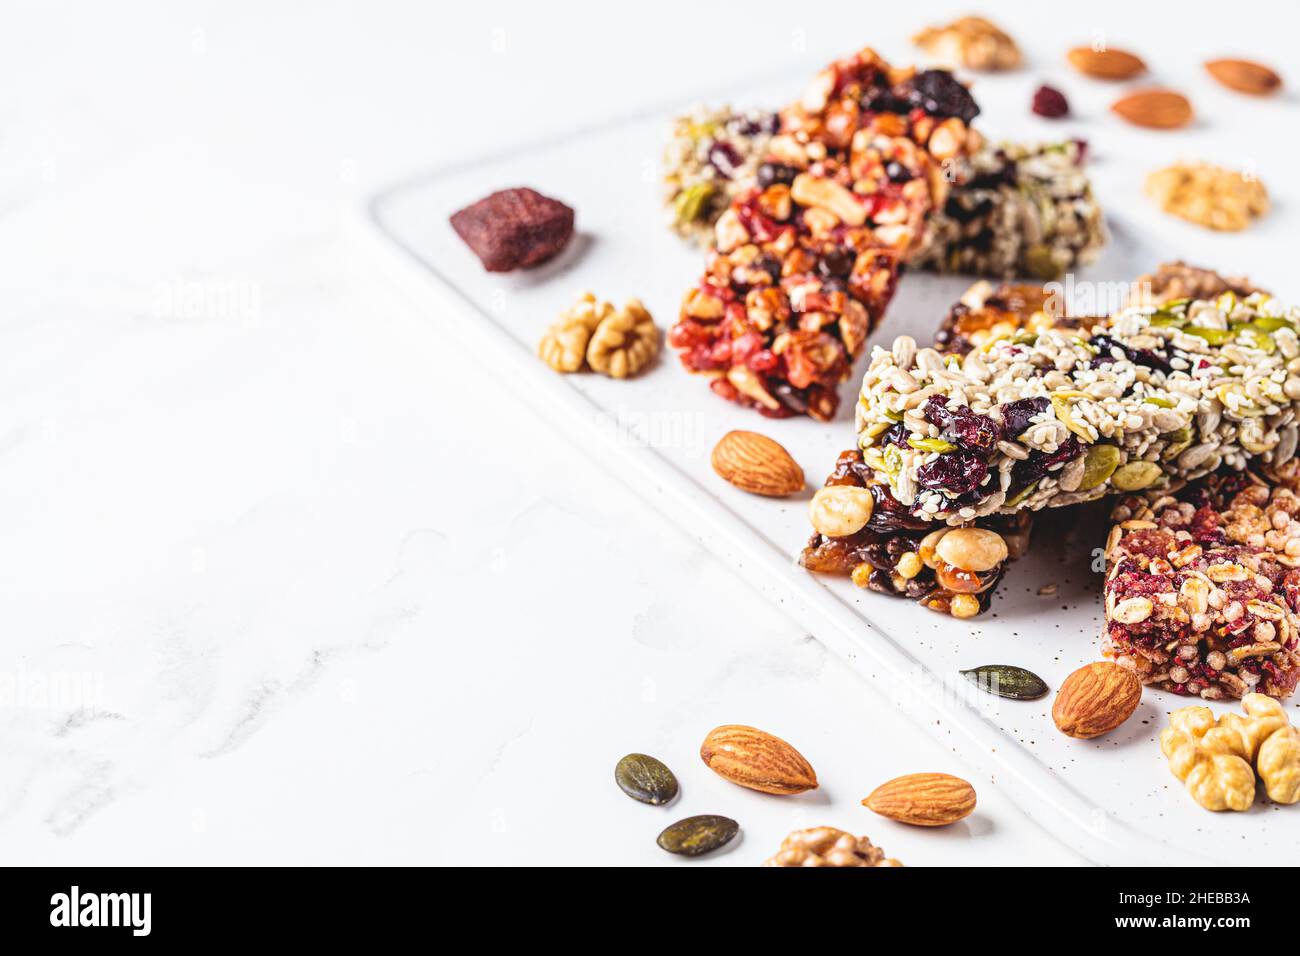 Energy granola bars with different seeds, nuts and dried fruits and berries on a white marble background, copy space. Healthy snack concept. Stock Photo